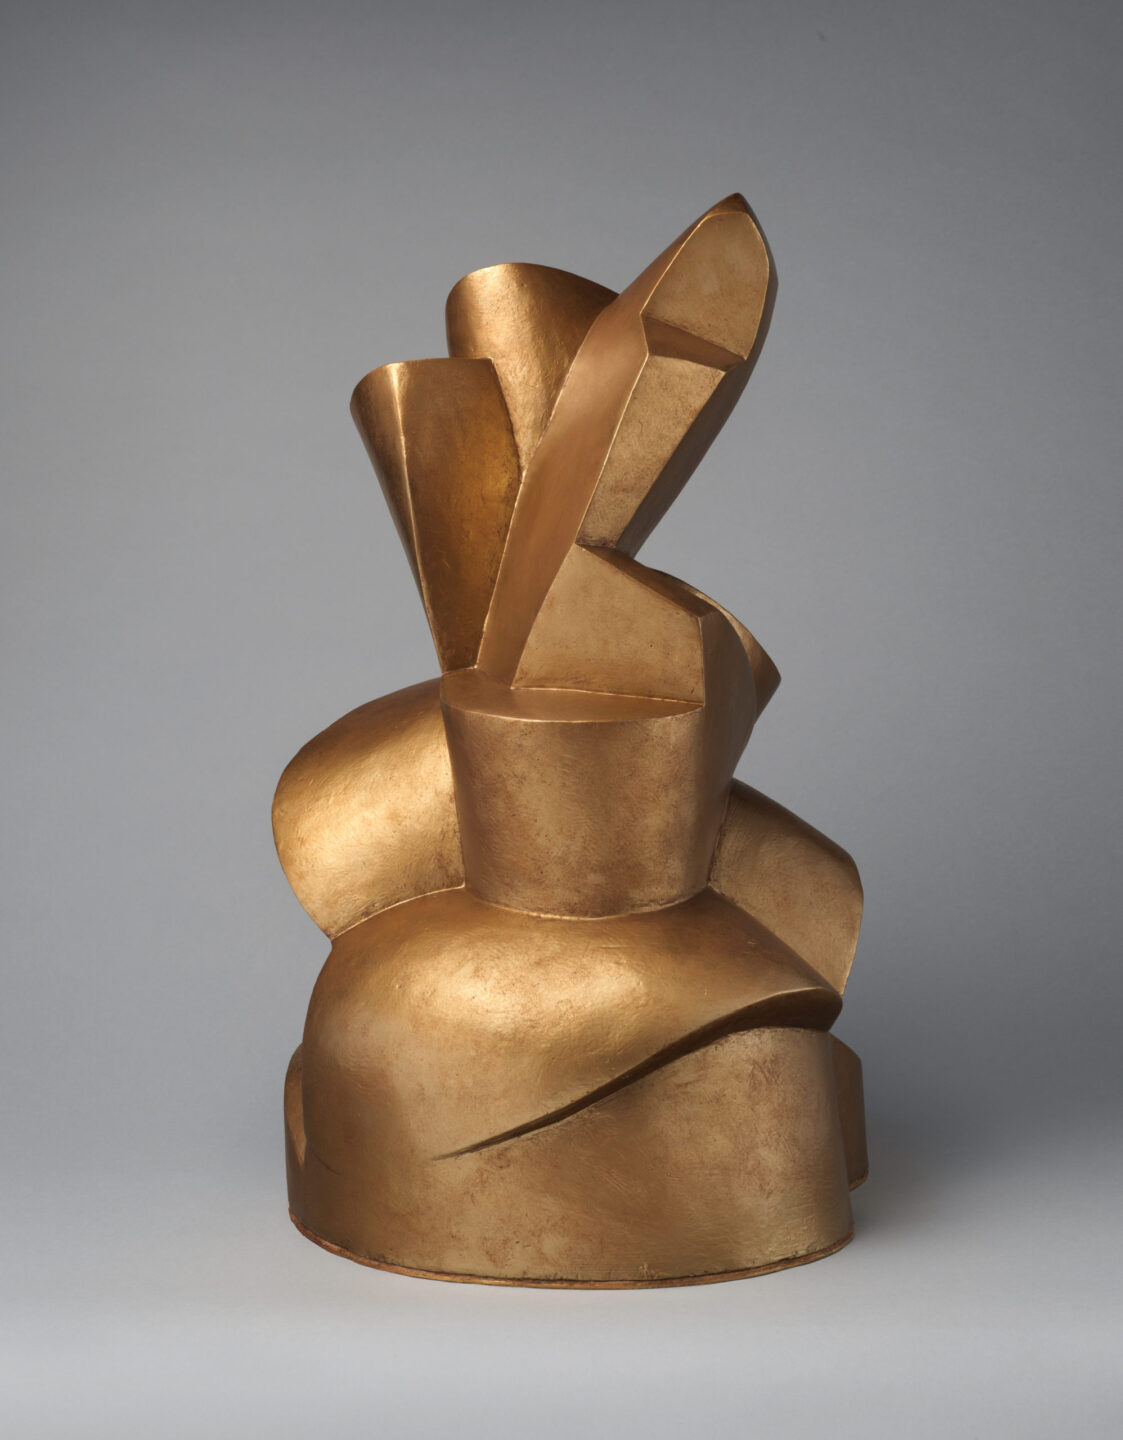 Gold sculpture of broad, cylindrical and flat-edged forms including a spiral.